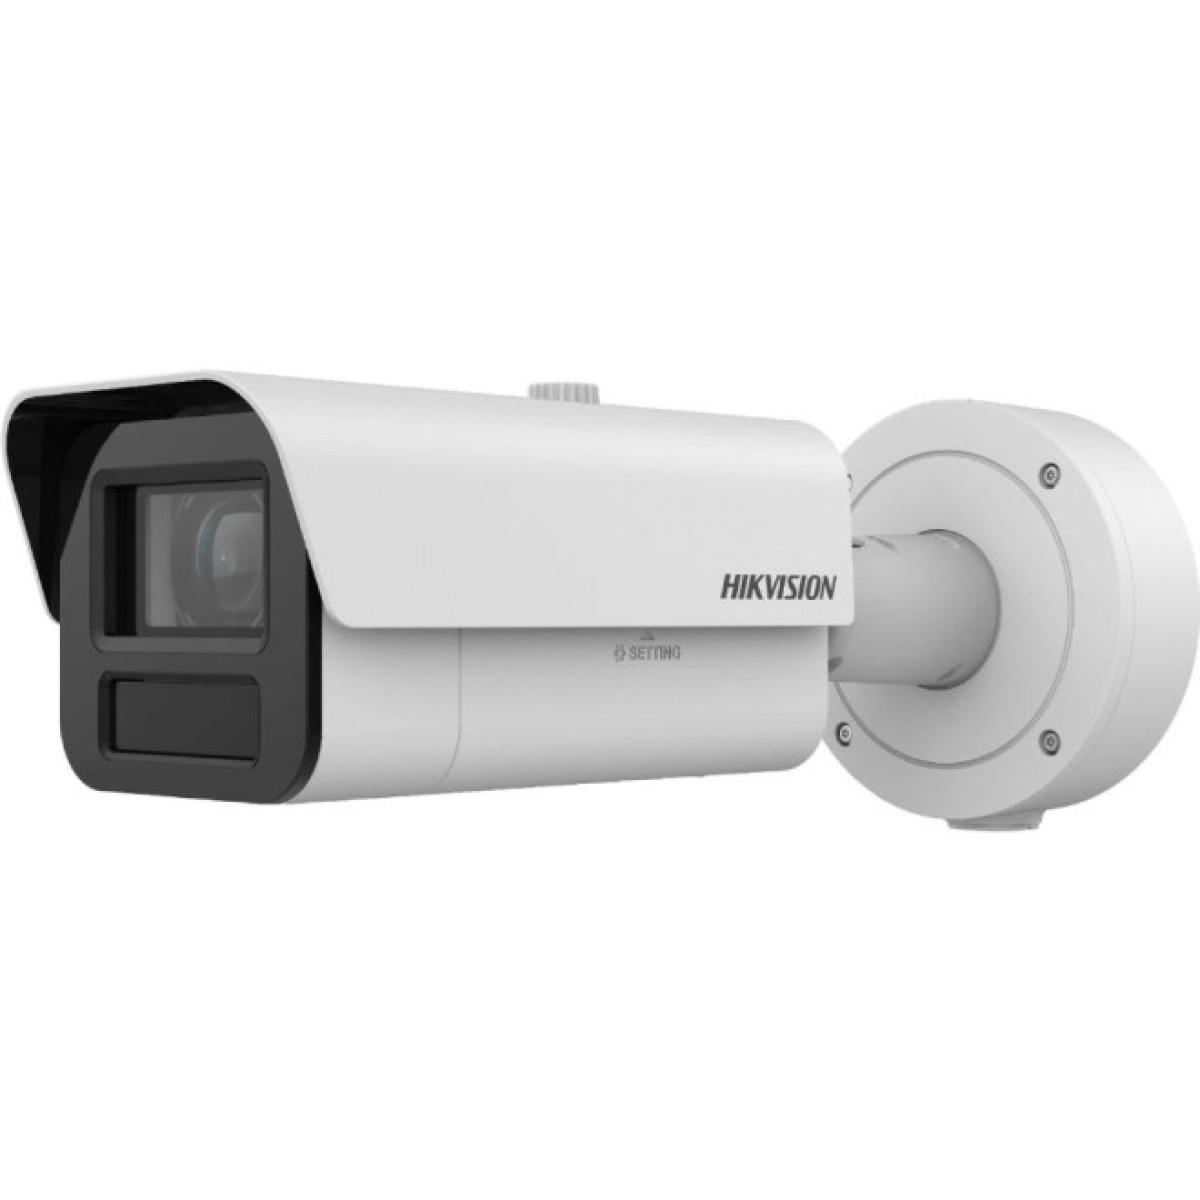 IP-камера Hikvision iDS-2CD7A45G0-IZHS (4.7-118) 98_98.jpg